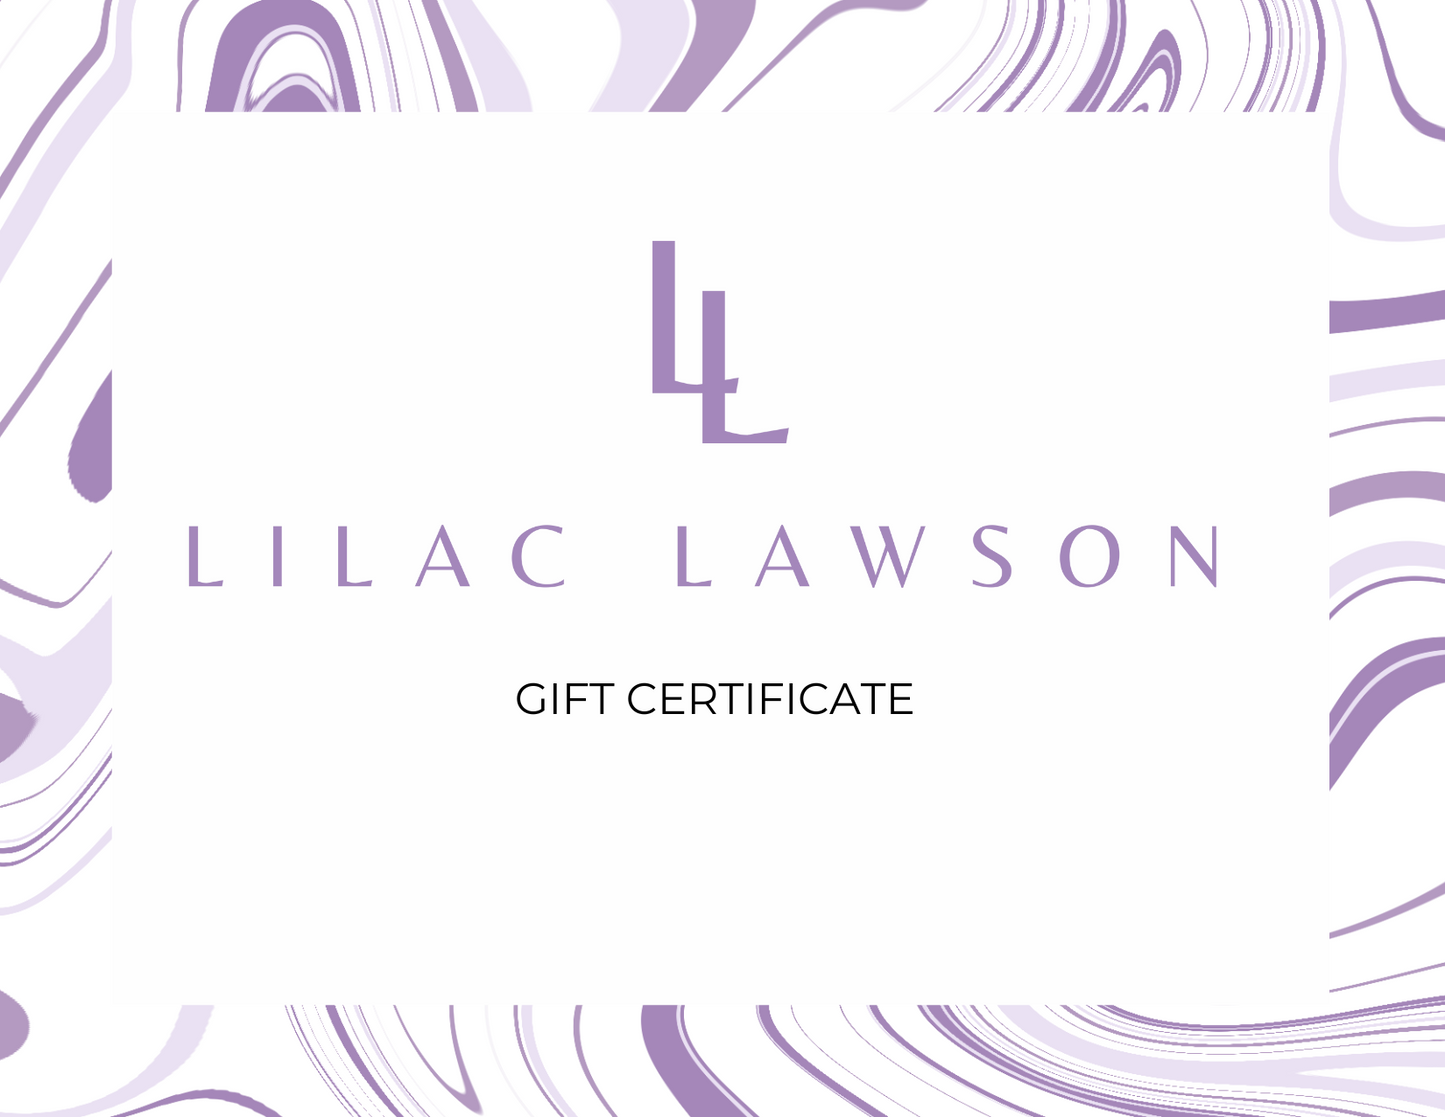 Lilac Lawson Gift Certificate